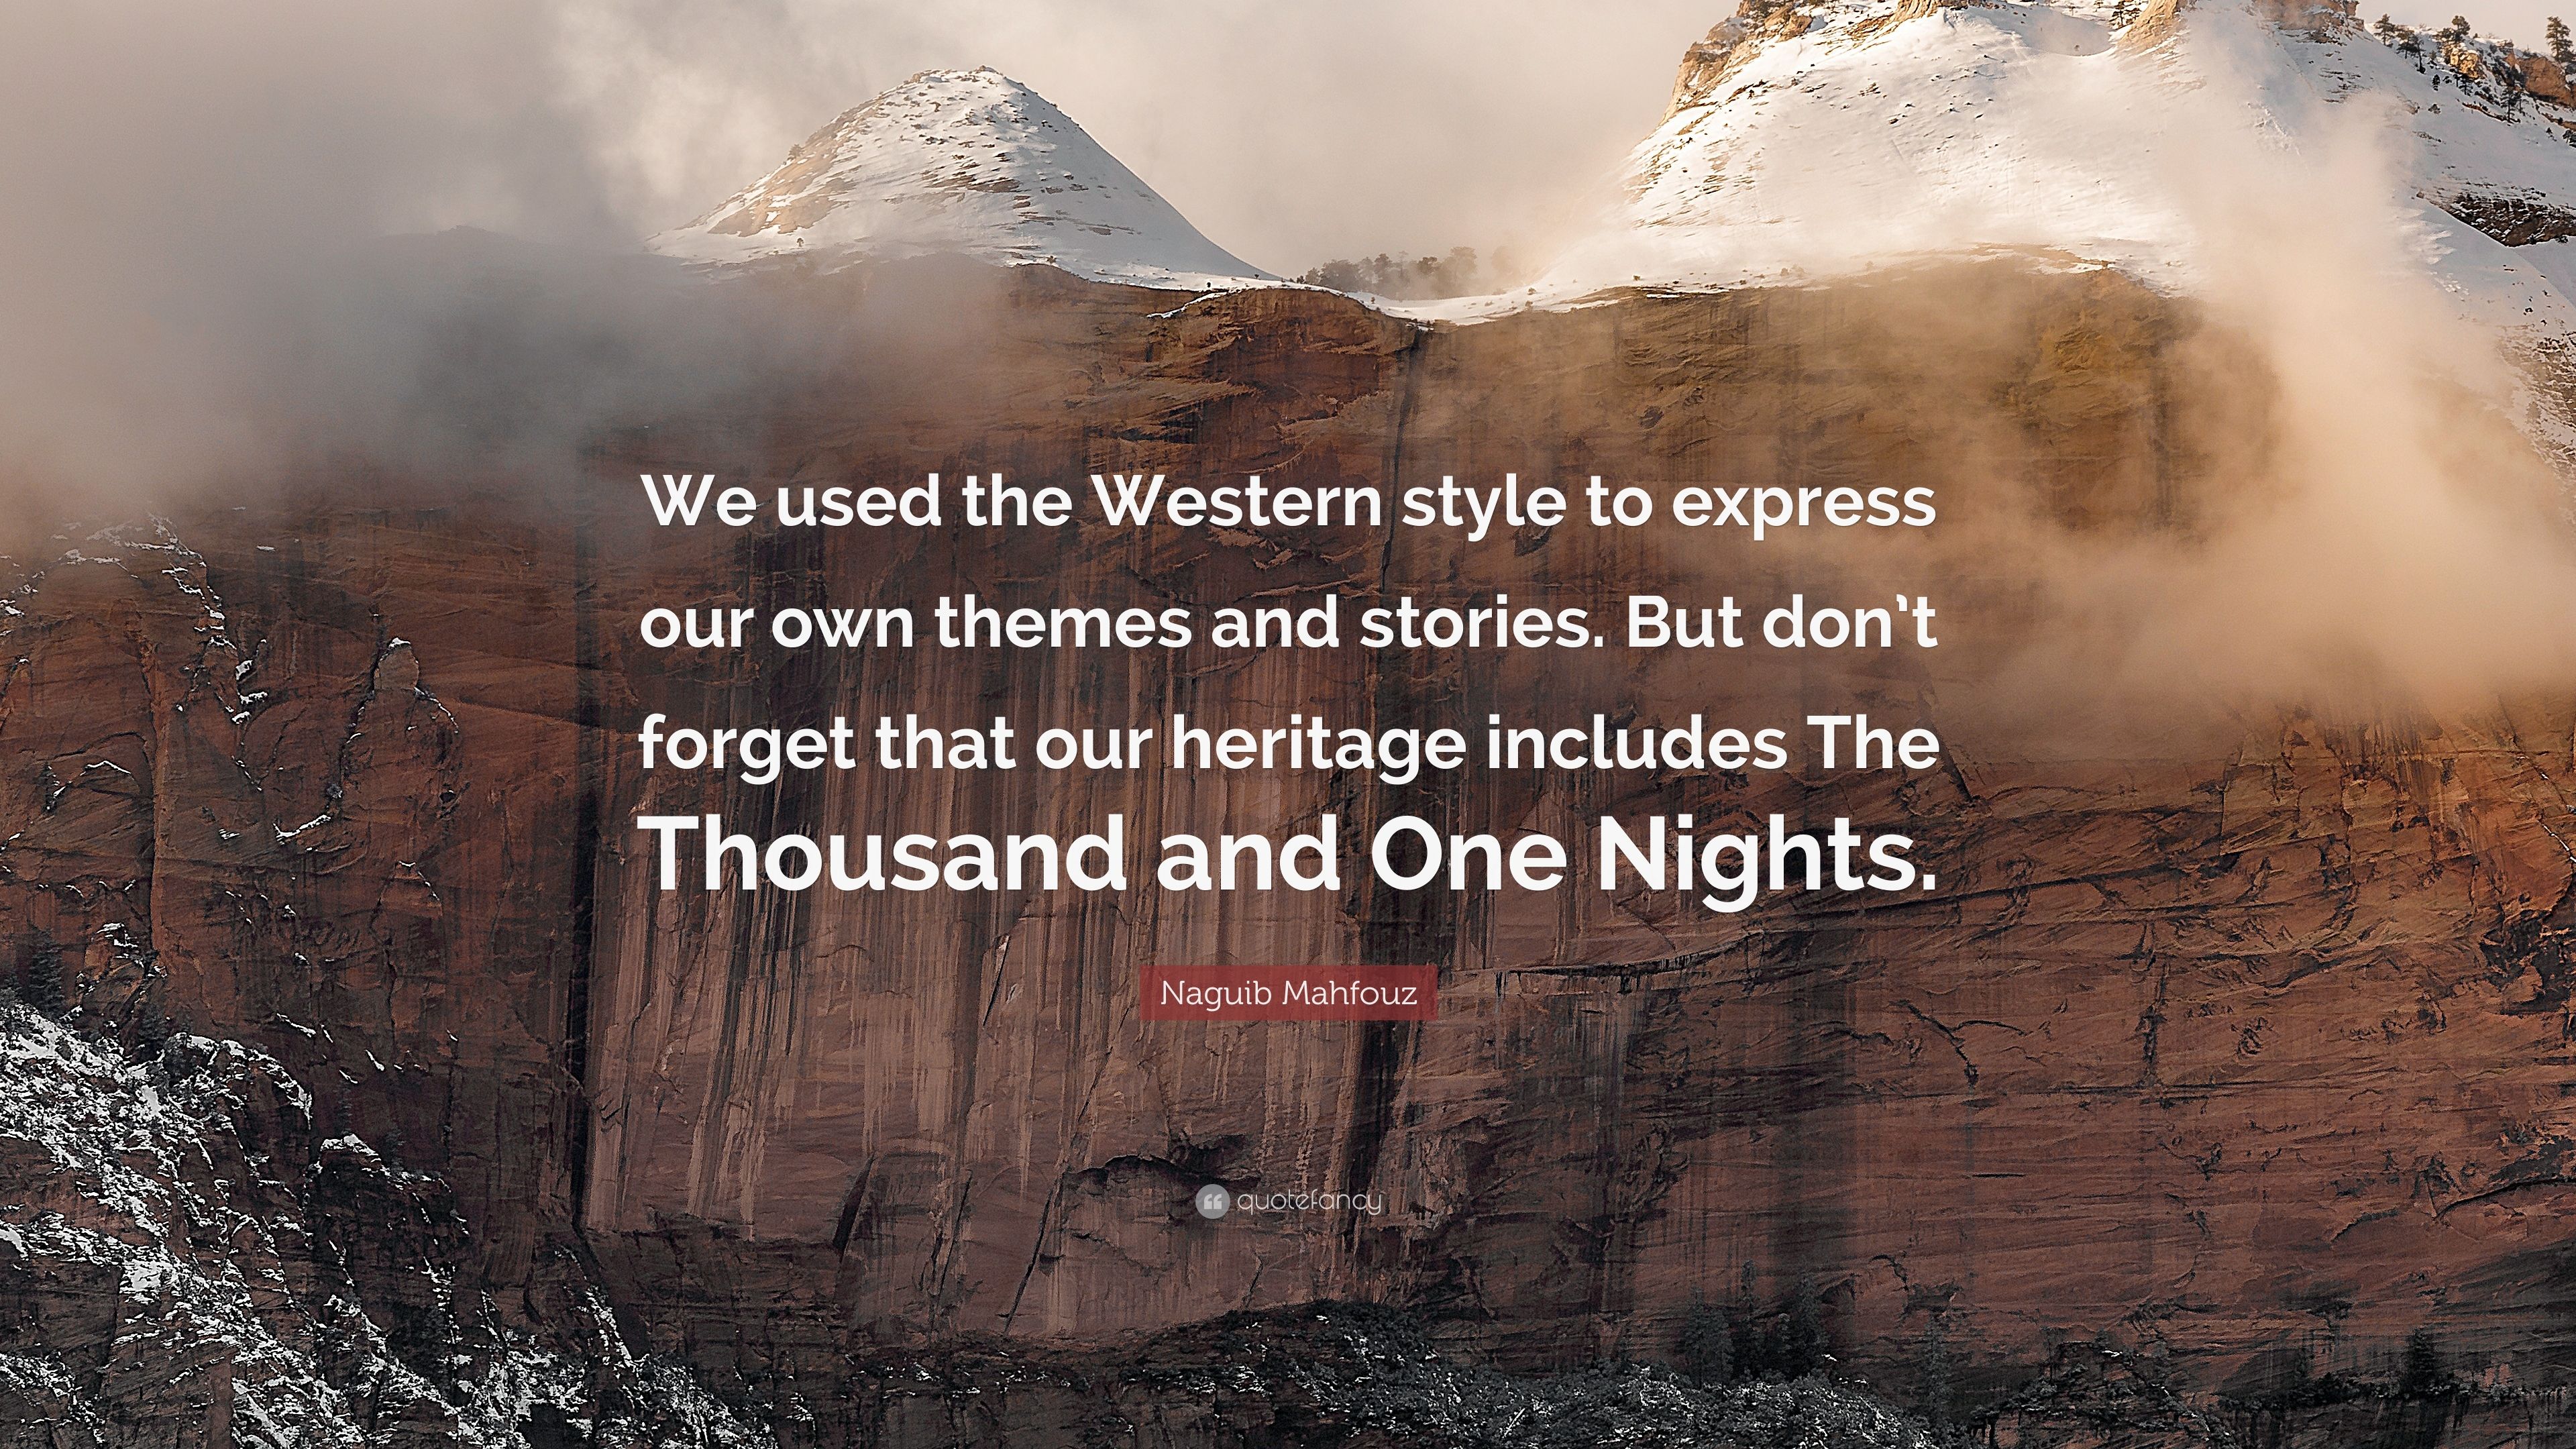 Naguib Mahfouz Quote: “We used the Western style to express our own